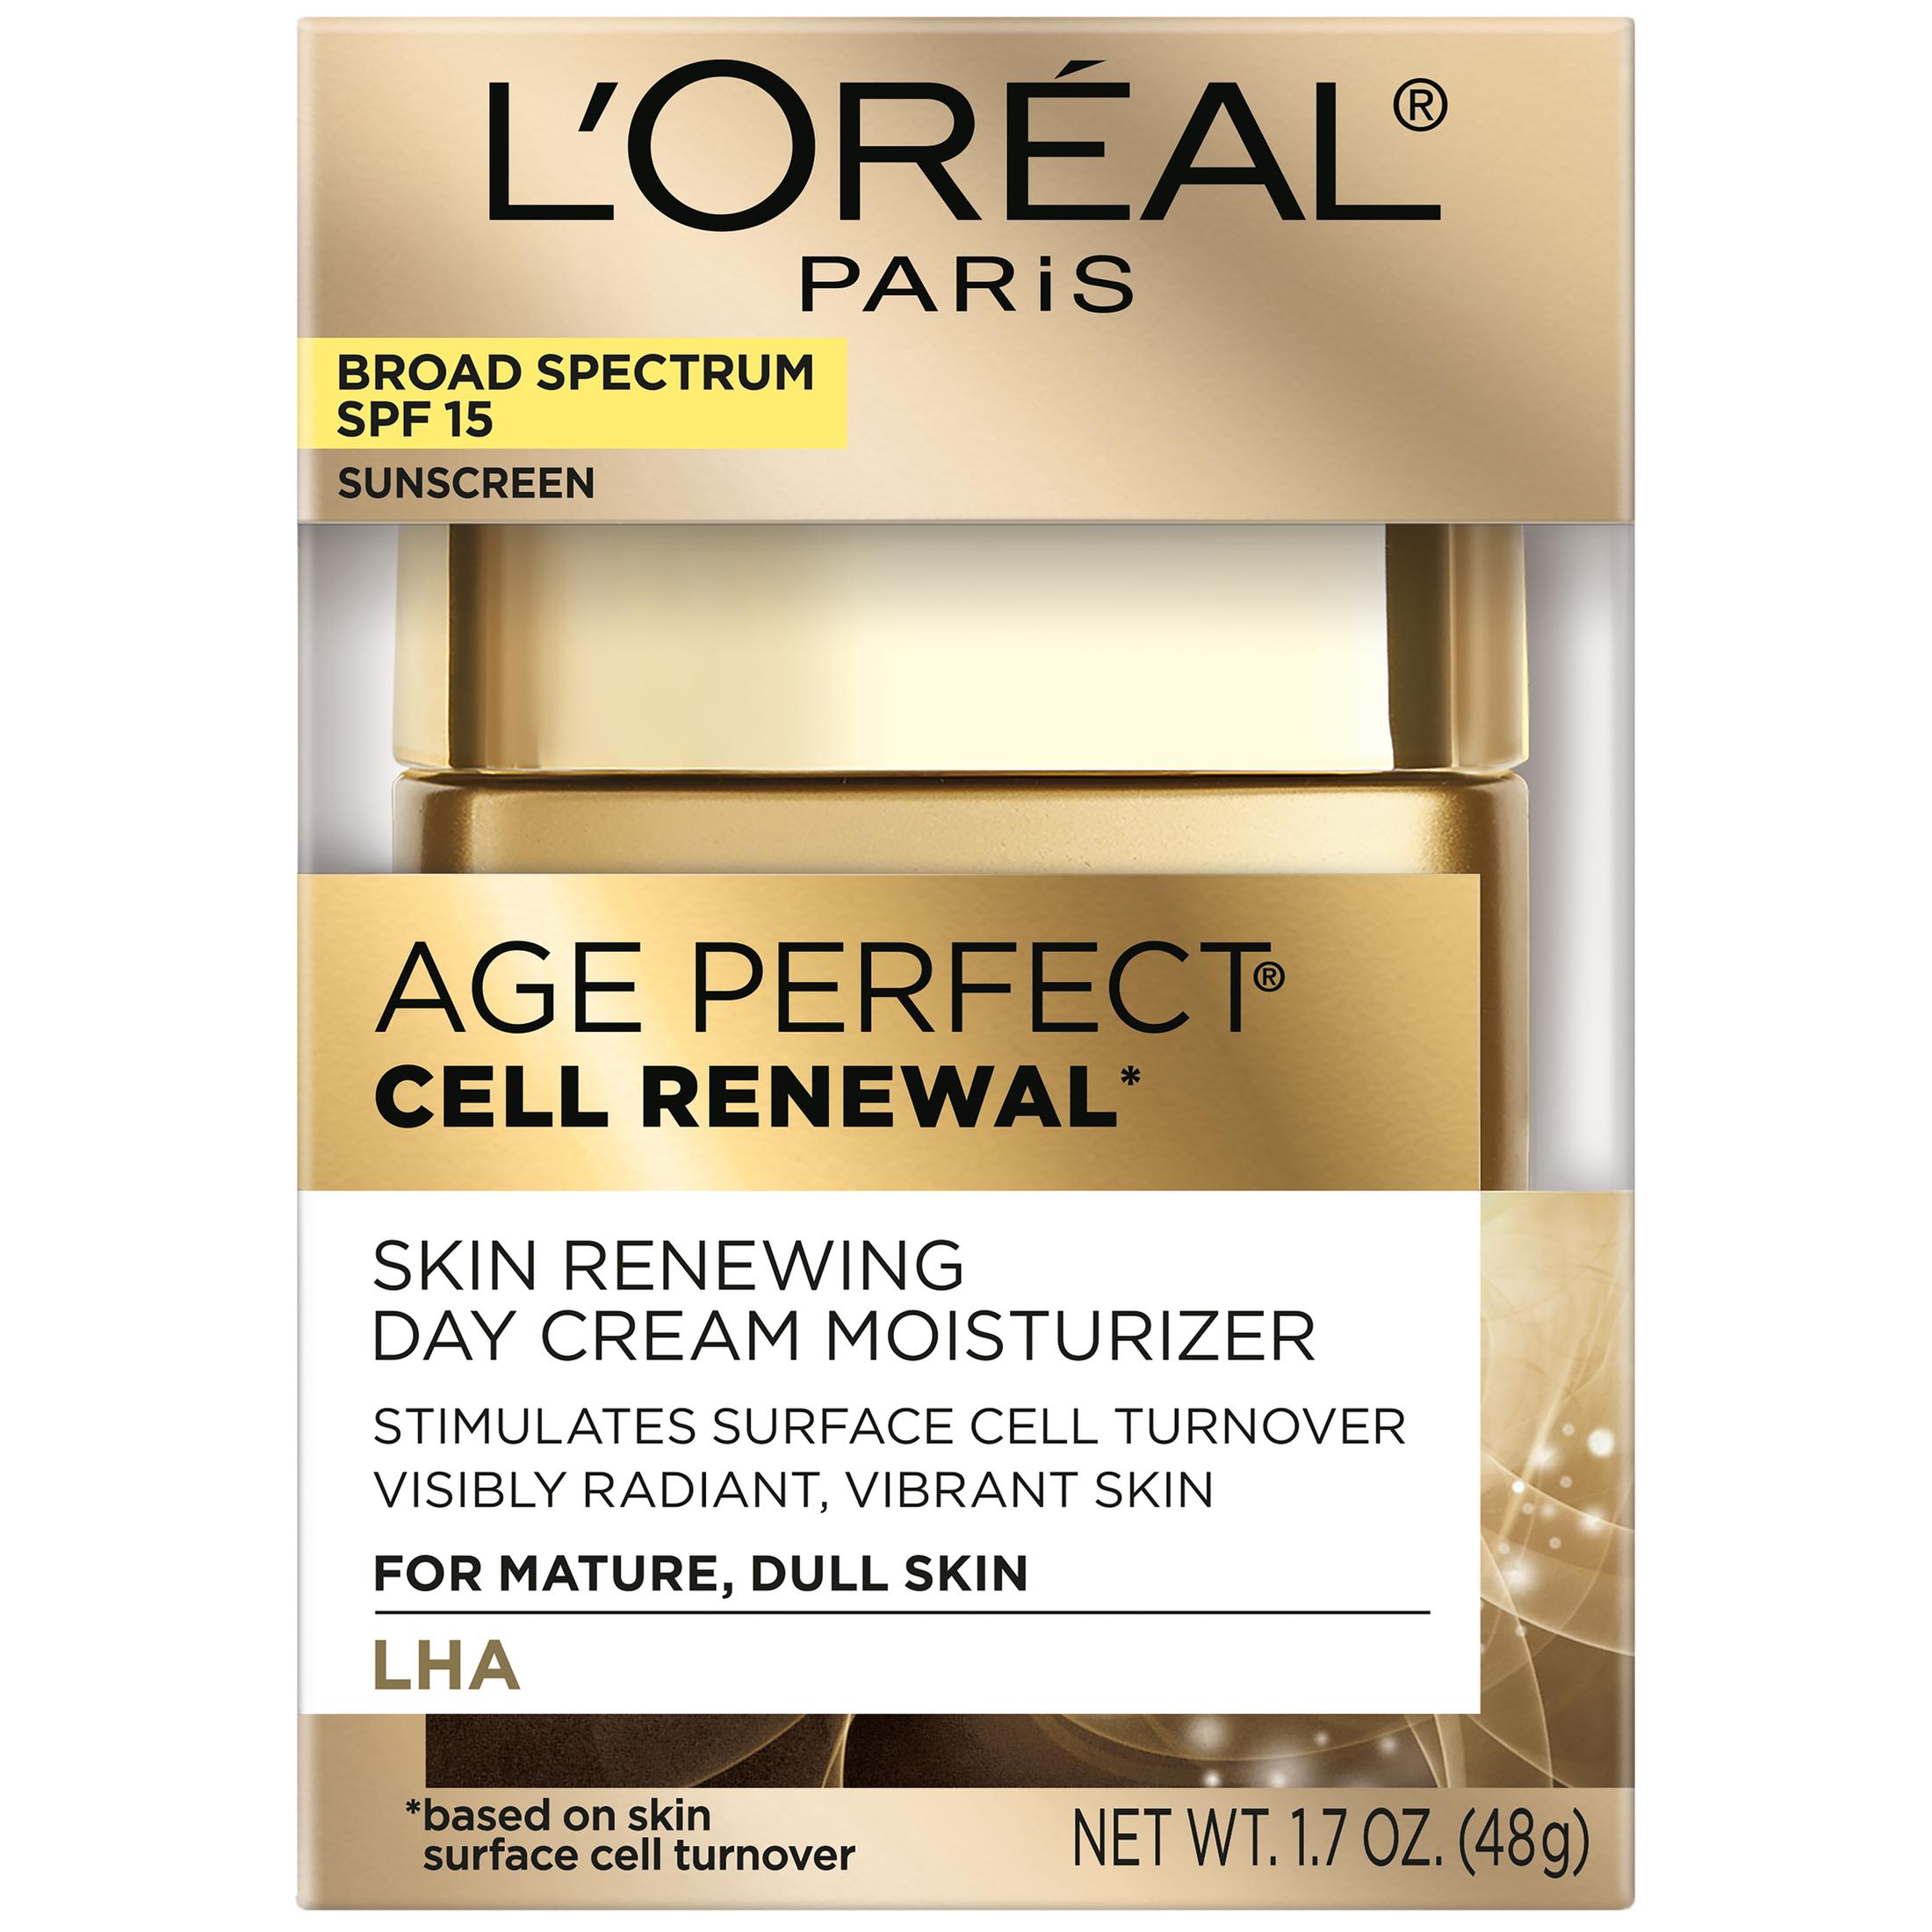 L'Oreal Paris Age Perfect Cell Renewal Day Cream Broad Spectrum SPF 15 Sunscreen, 1.7 oz - image 4 of 11